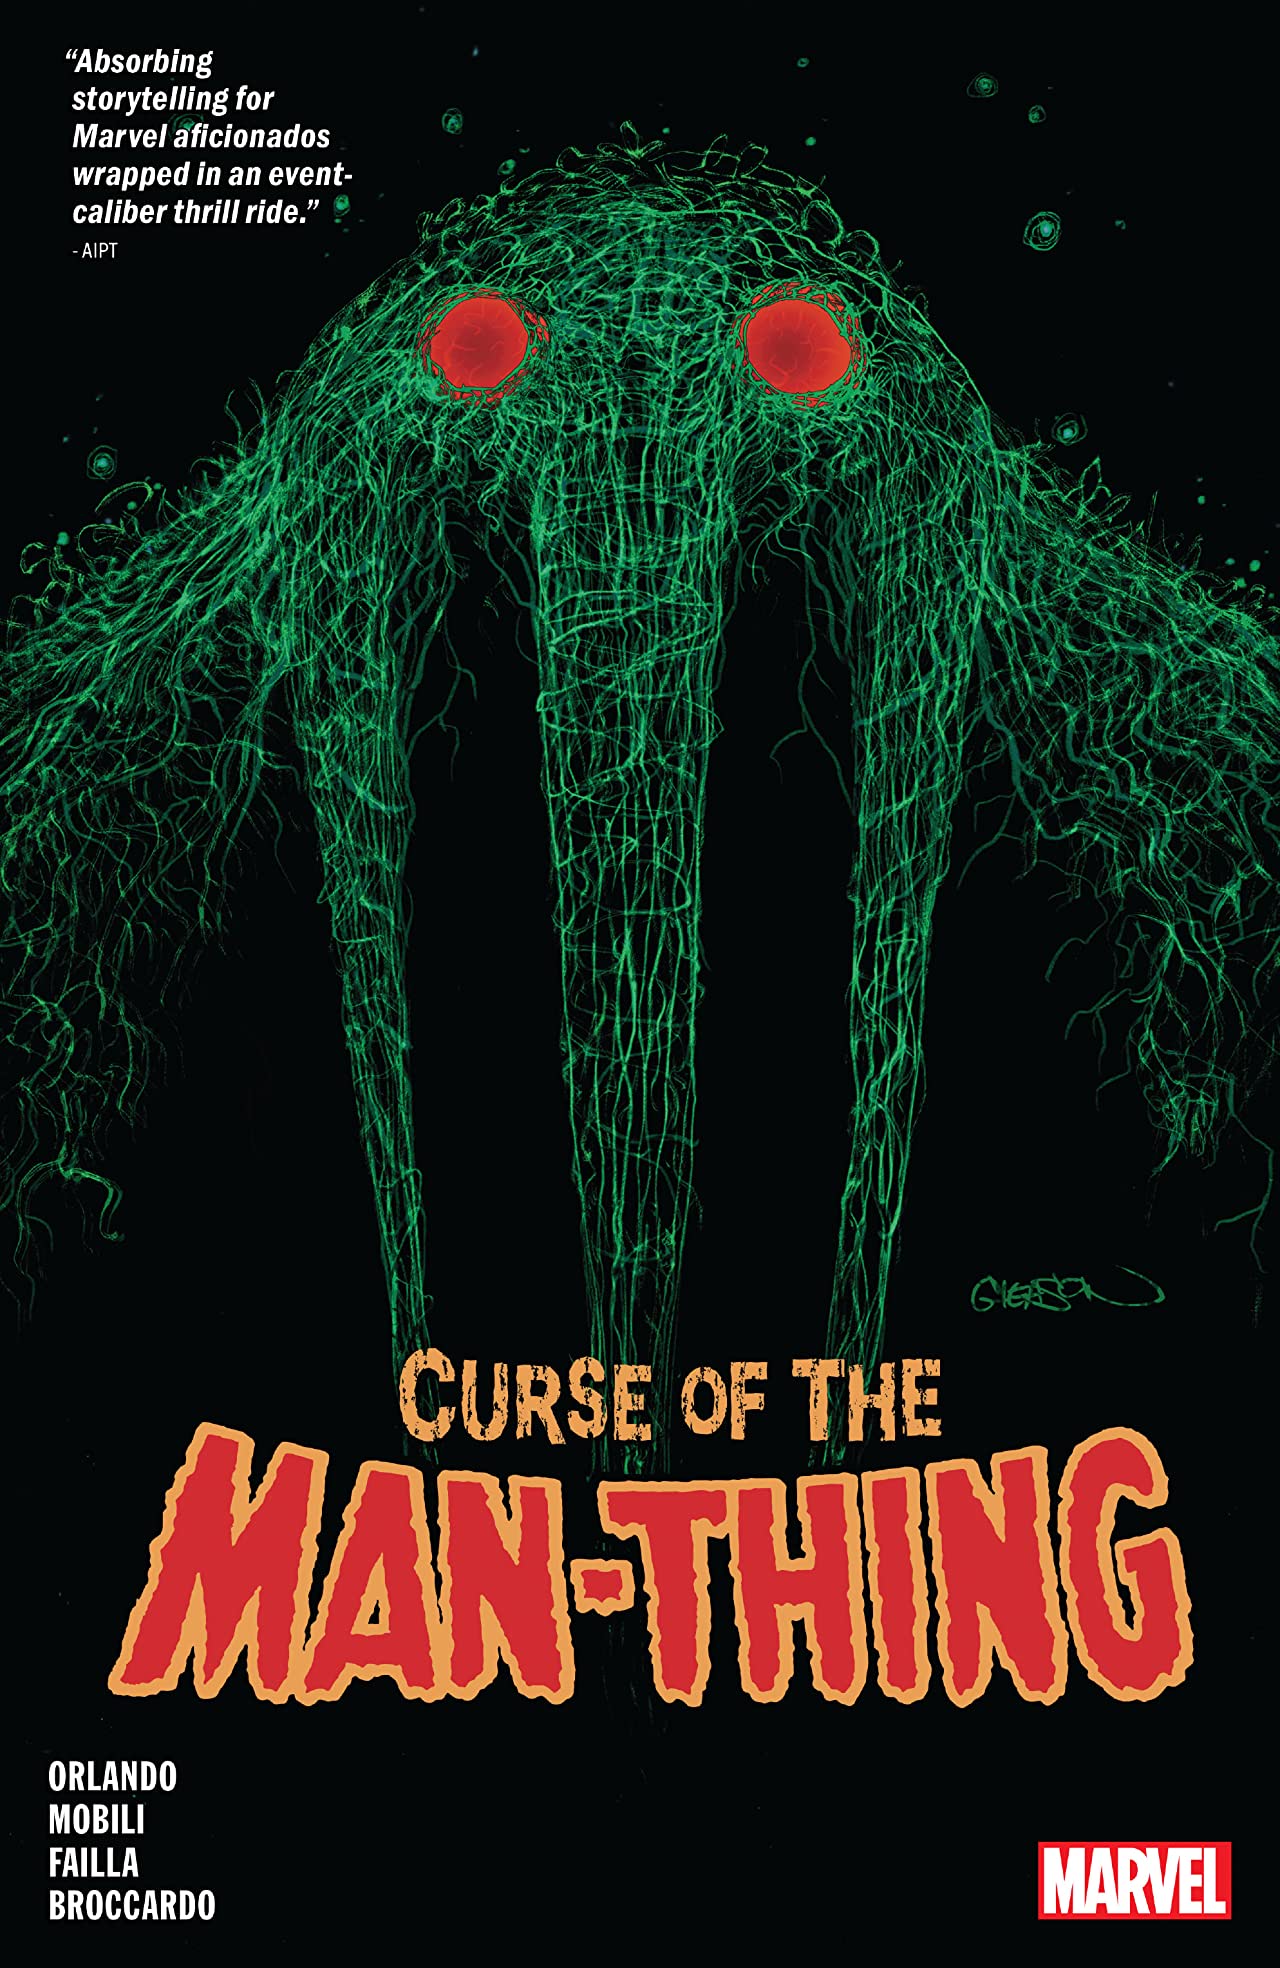 Curse of Man-Thing Graphic Novel